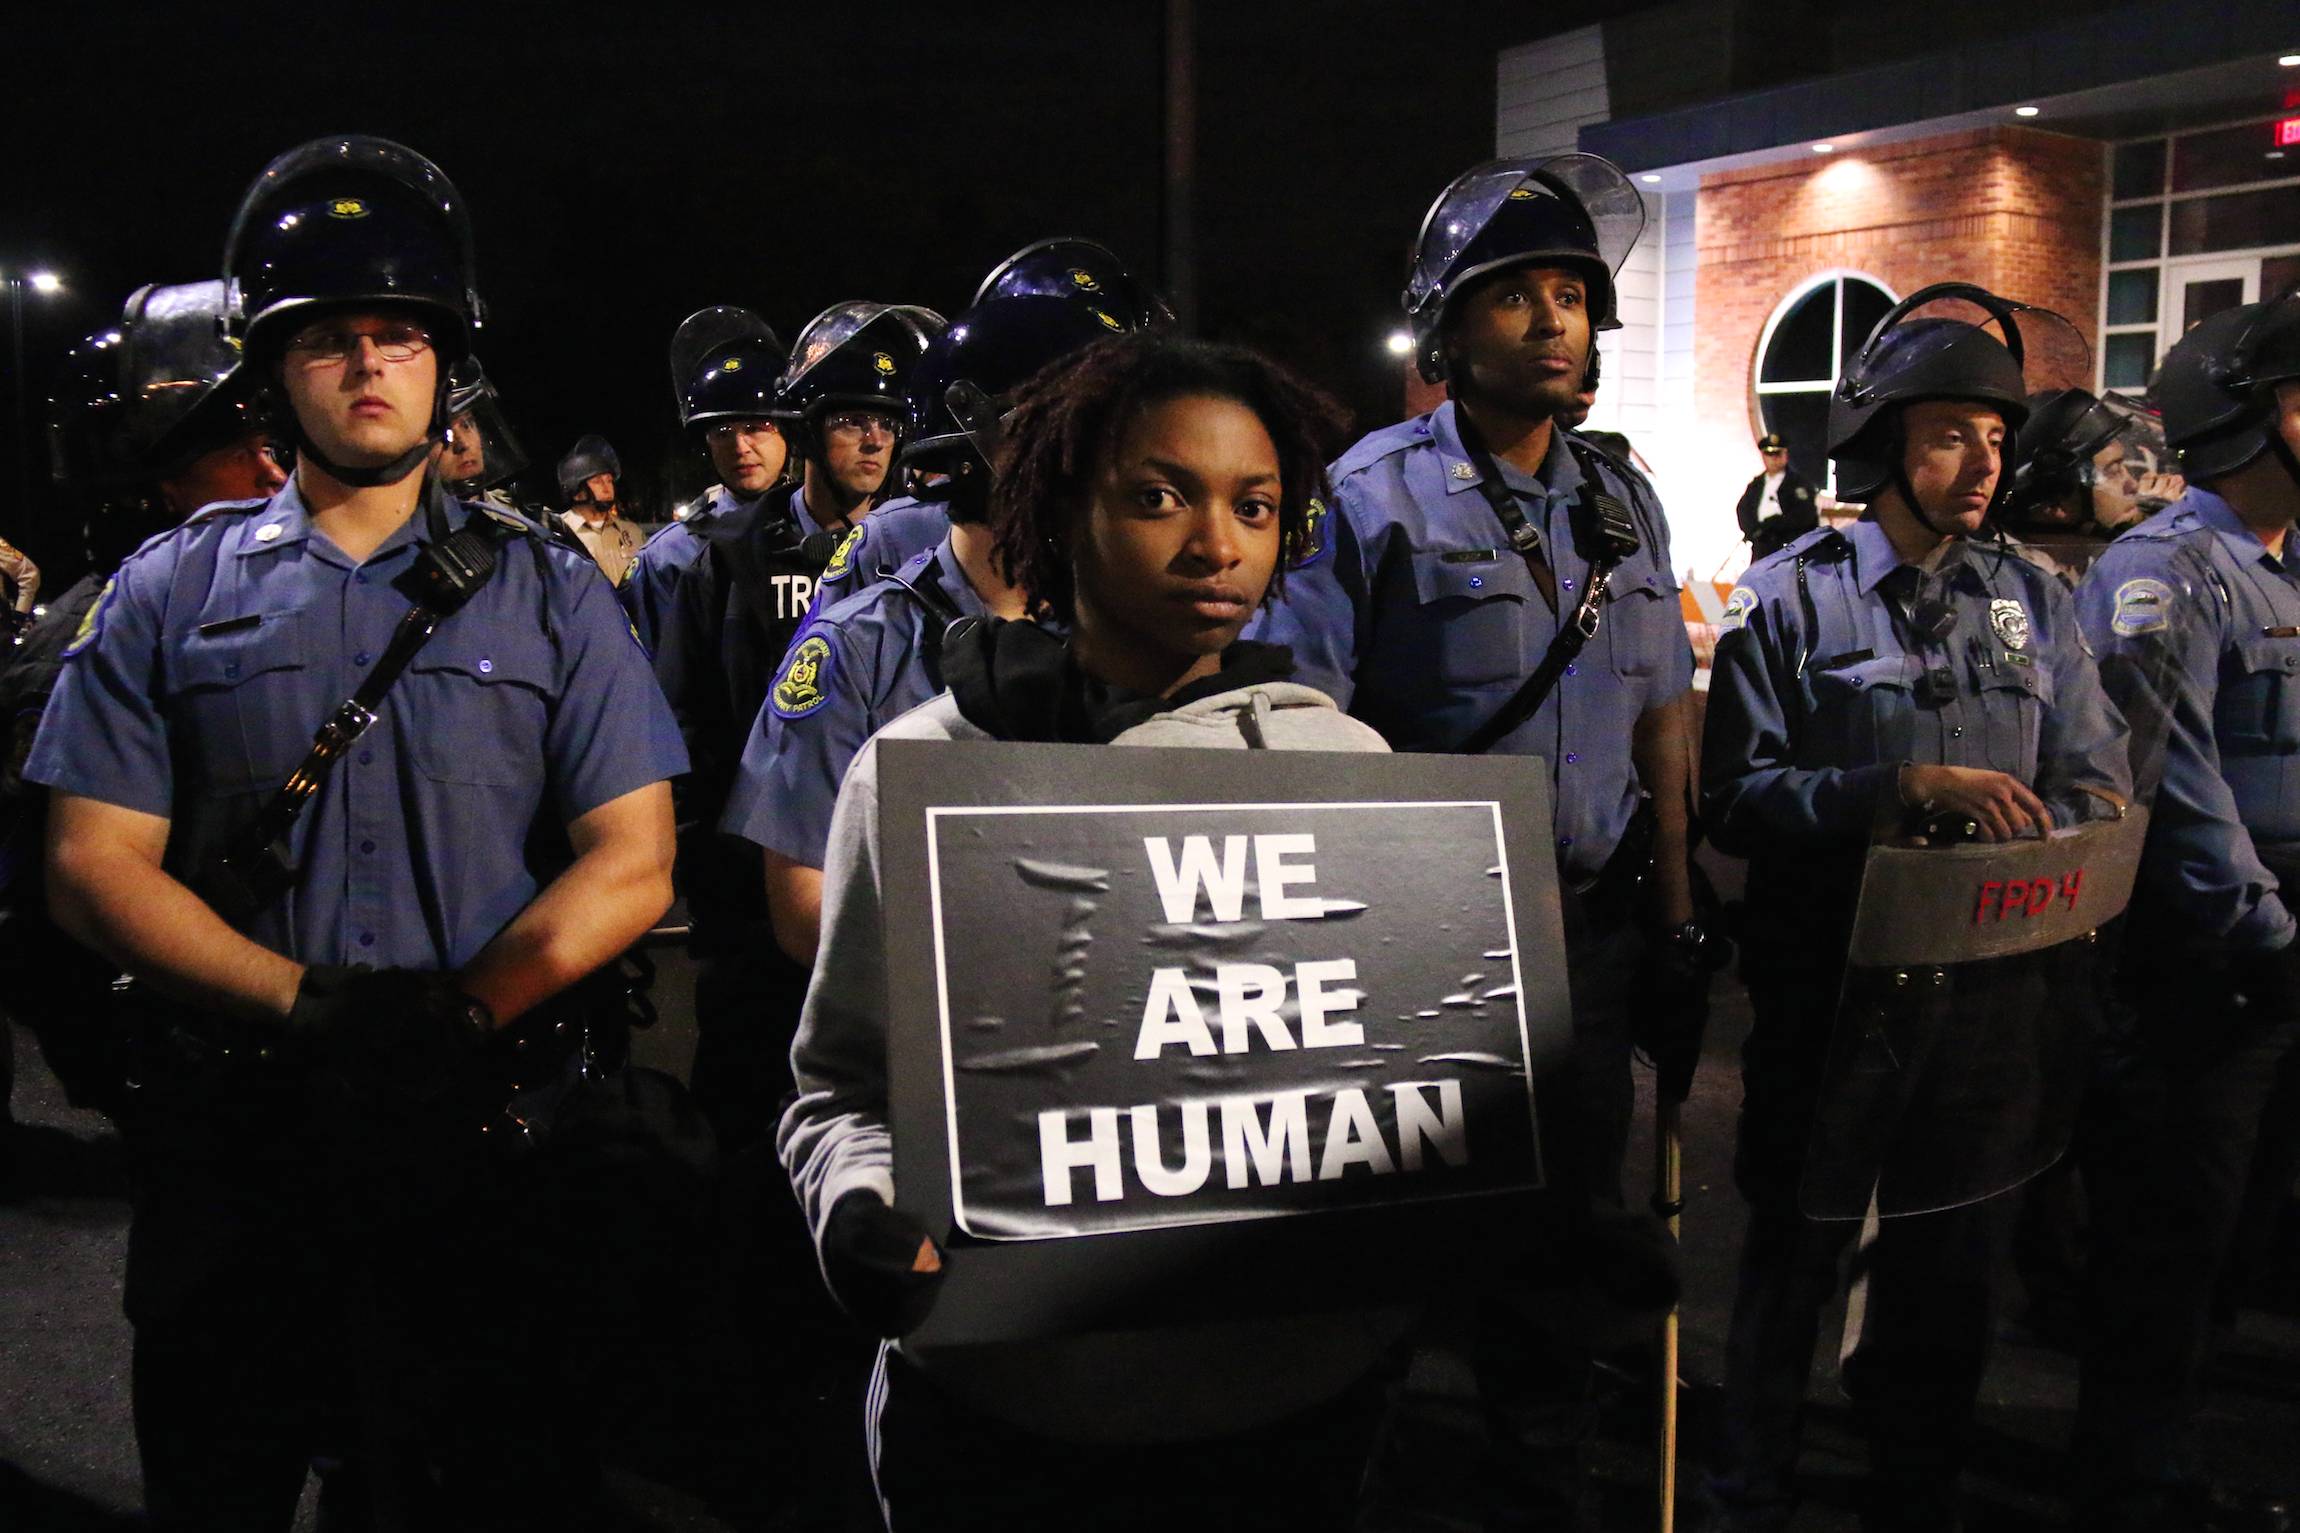 A man holds a sign reading "we are human" during a standoff between police and protesters at the Ferguson Police Departement, in Ferguson, Missouri, Oct. 11, 2014.